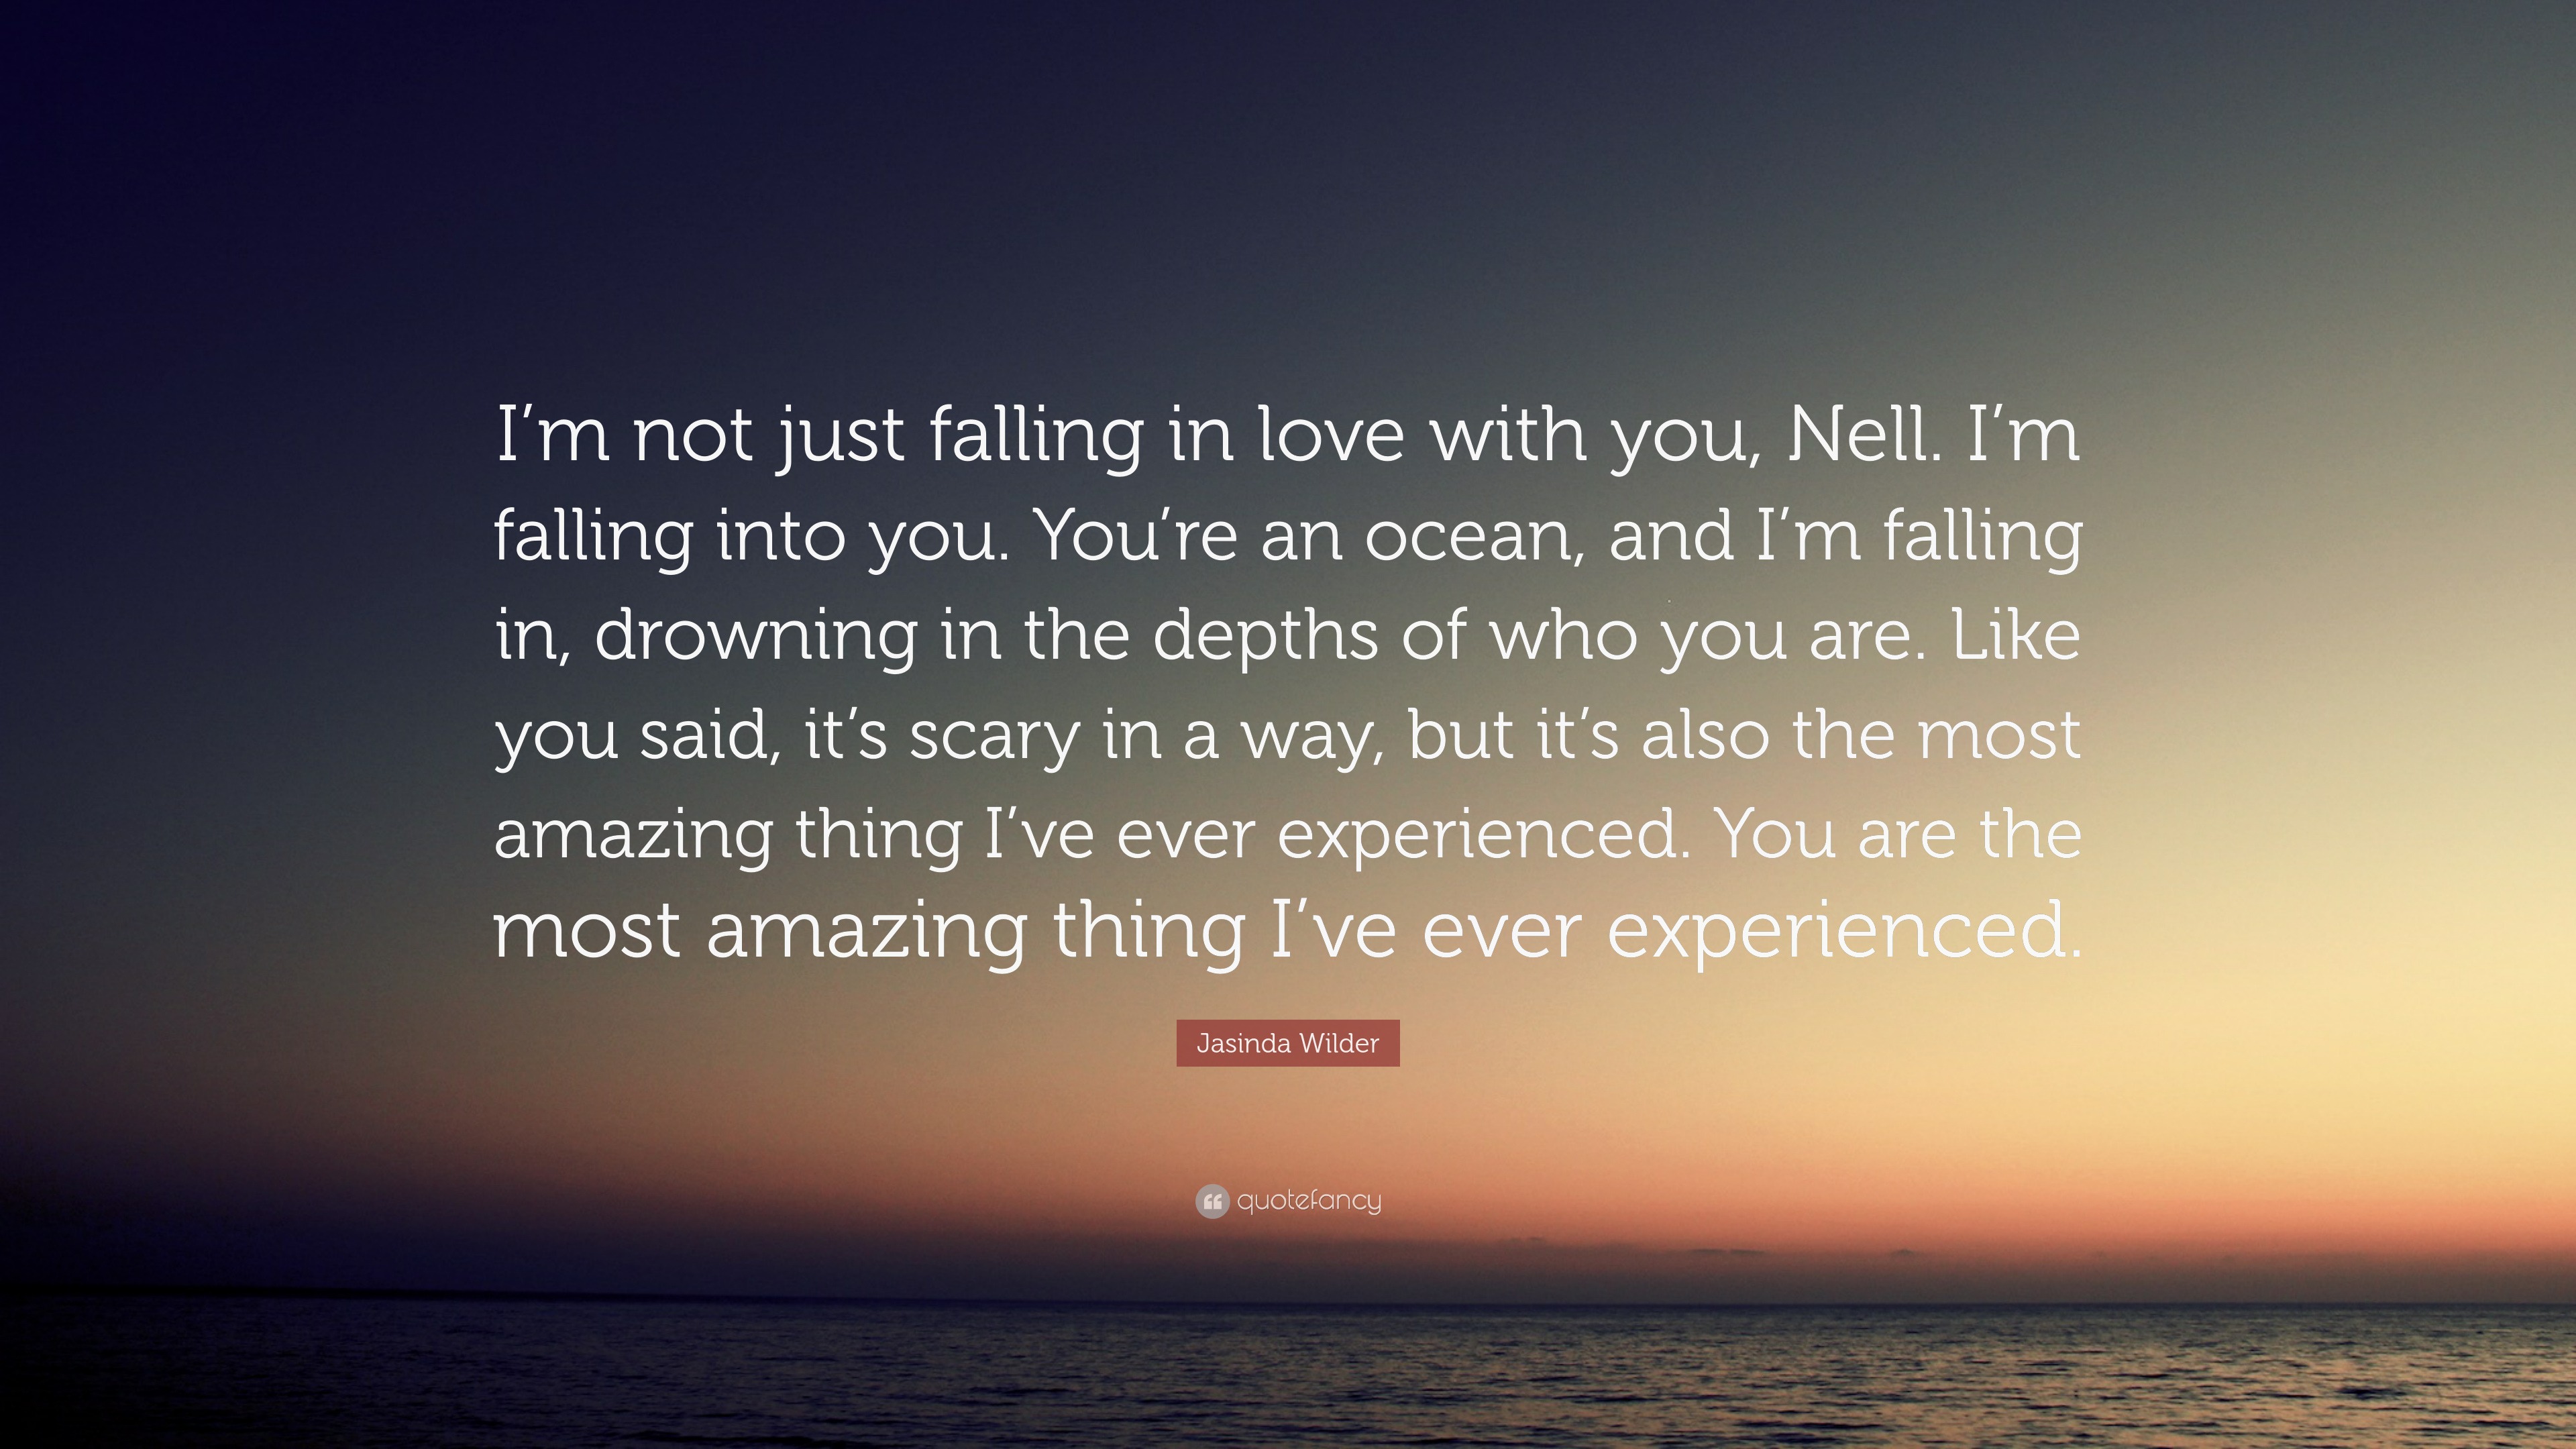 Jasinda Wilder Quote “I m not just falling in love with you